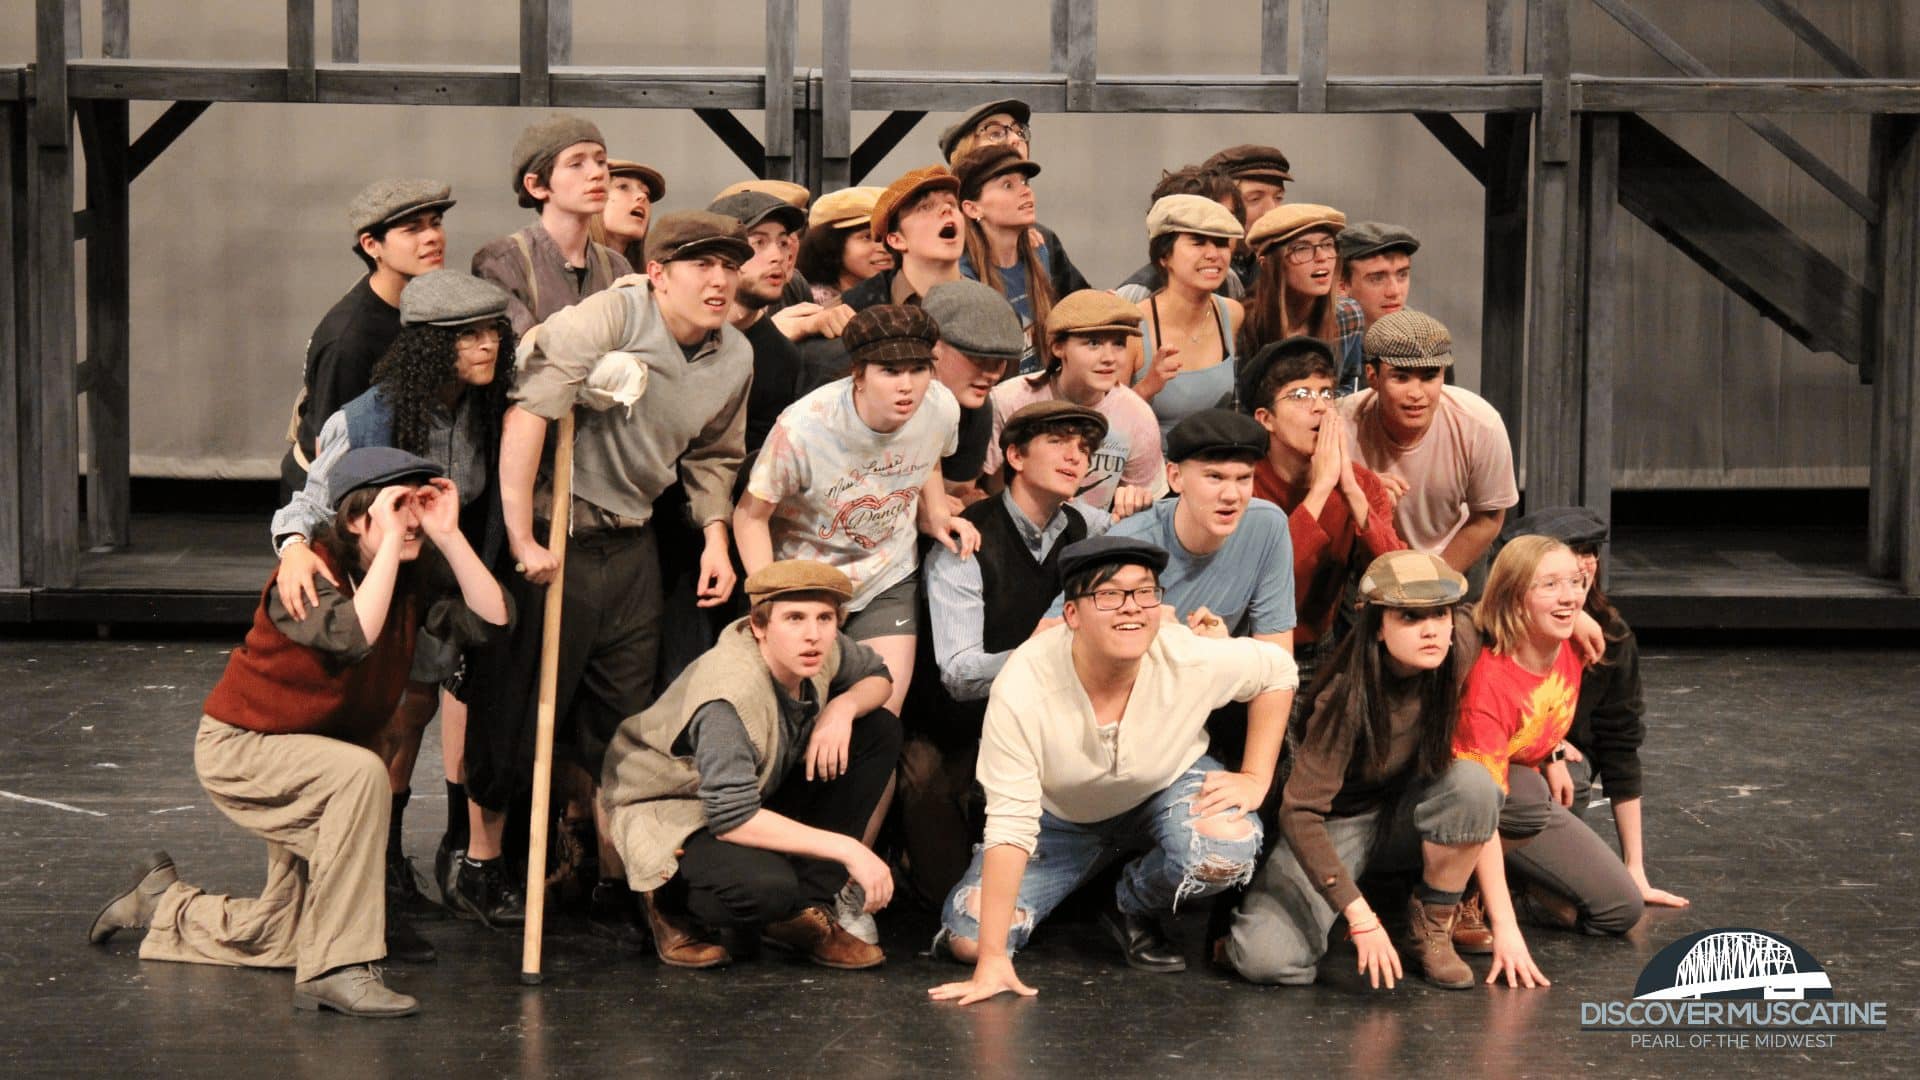 Watch What Happens Muscatine High School Newsies To Open Discover Muscatine